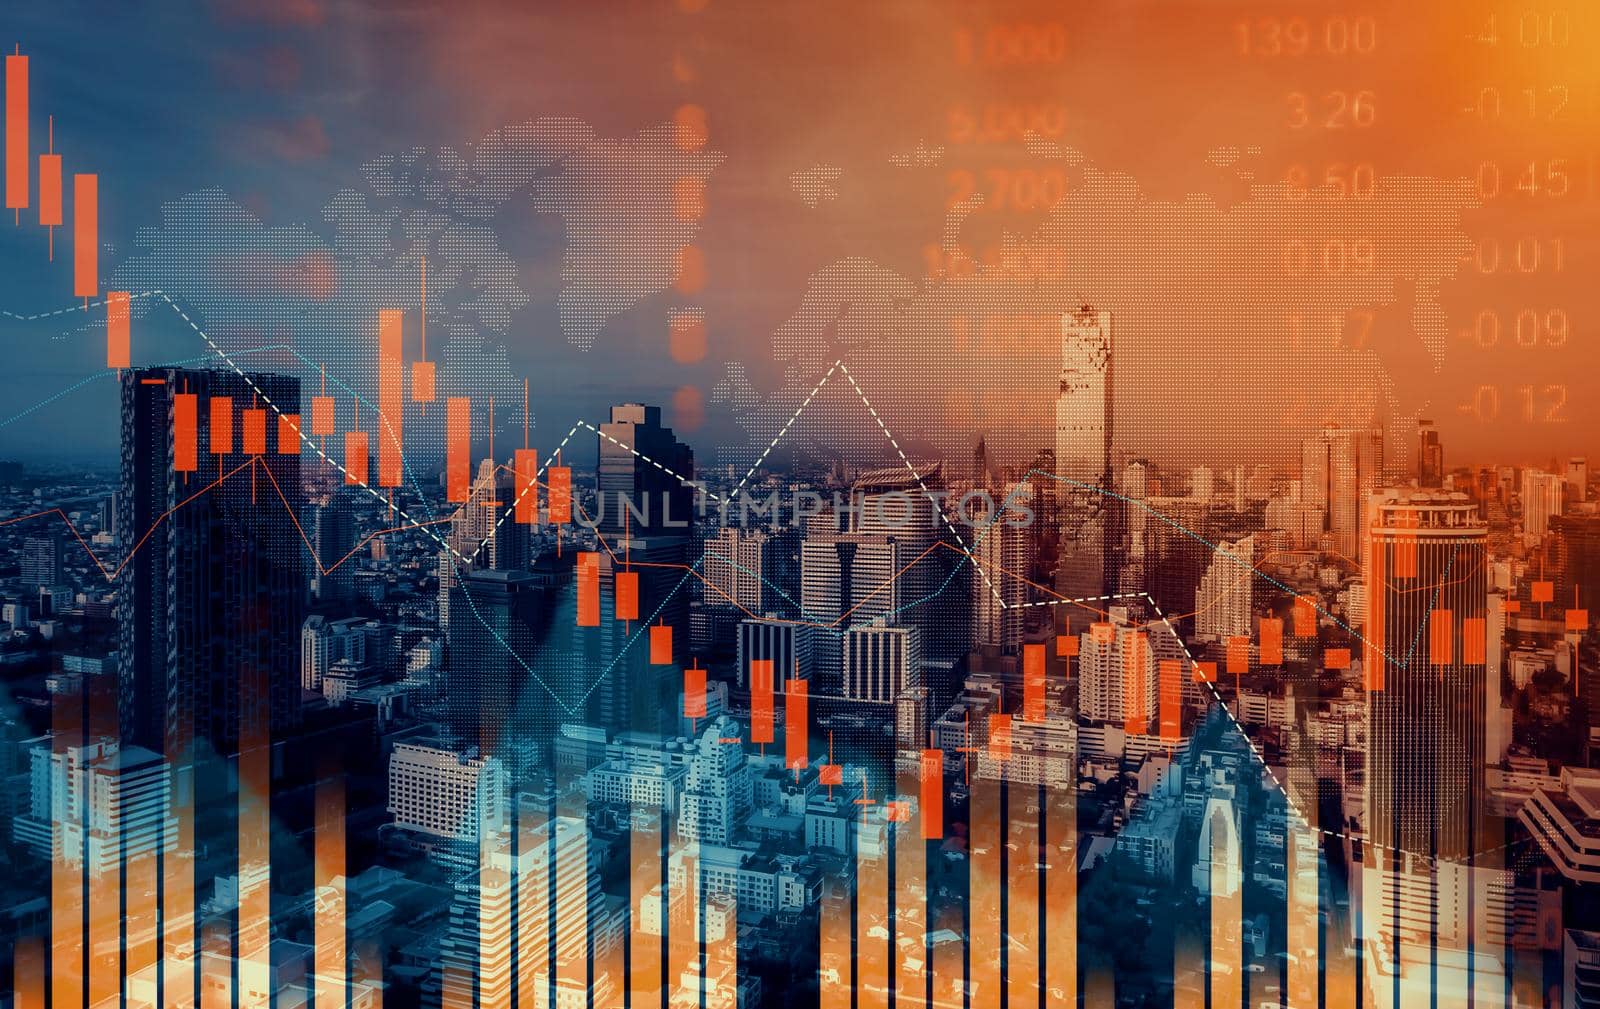 Economic crisis concept shown by declining graphs and digital indicators overlap modernistic city background. Double exposure.